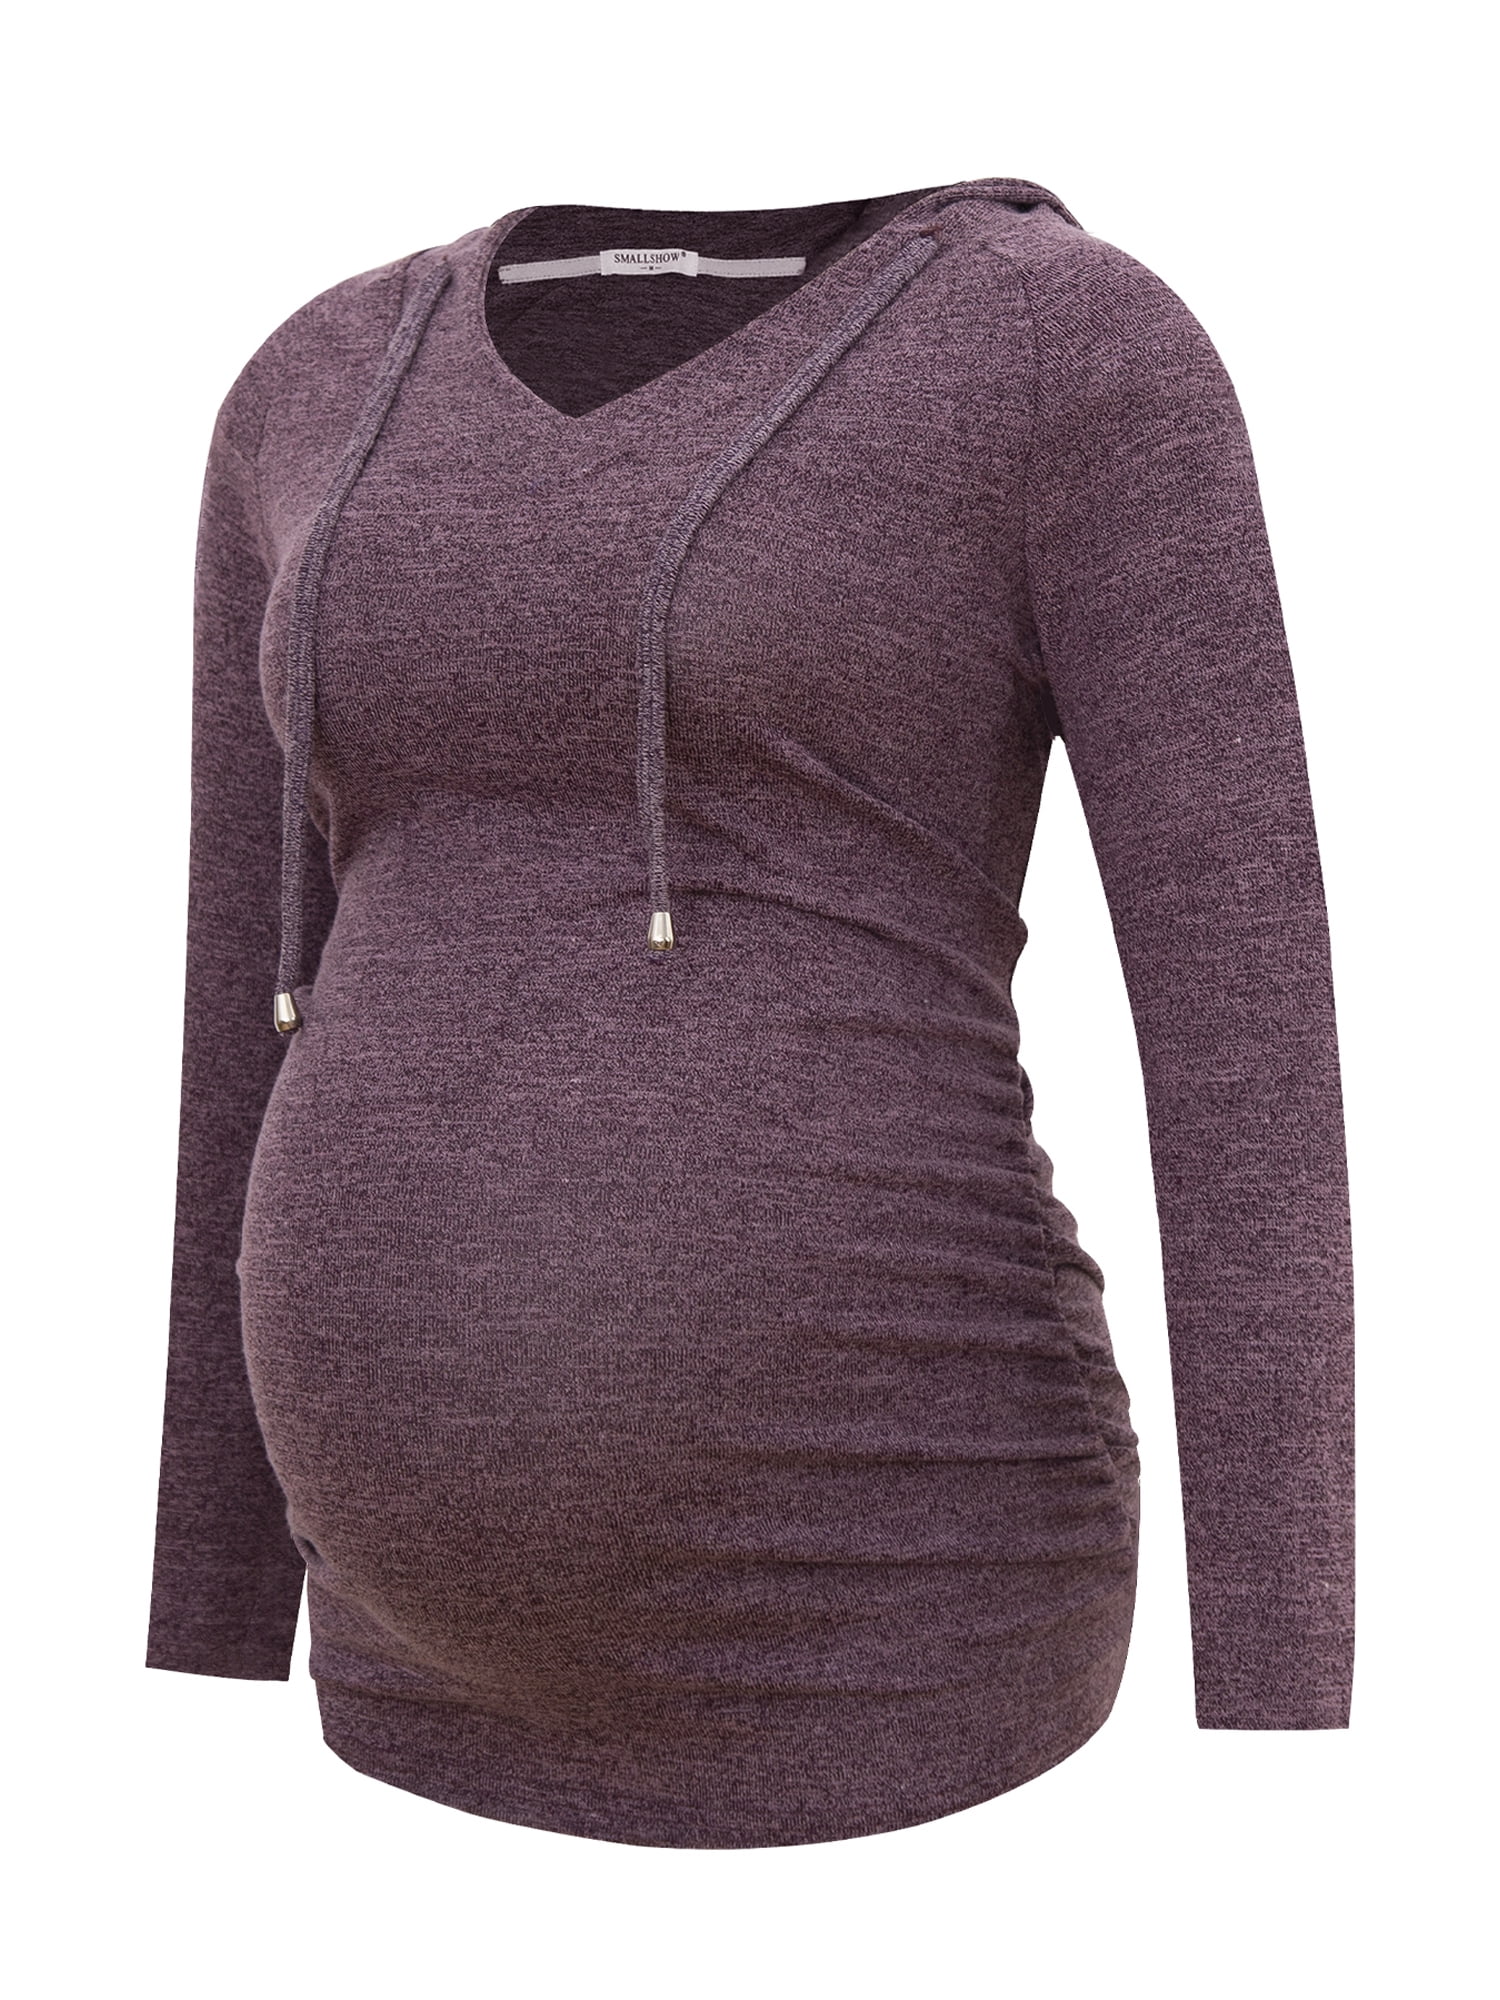 Smallshow Long Sleeve Pregnancy Shirt Hoodie Maternity Tops Clothes for ...